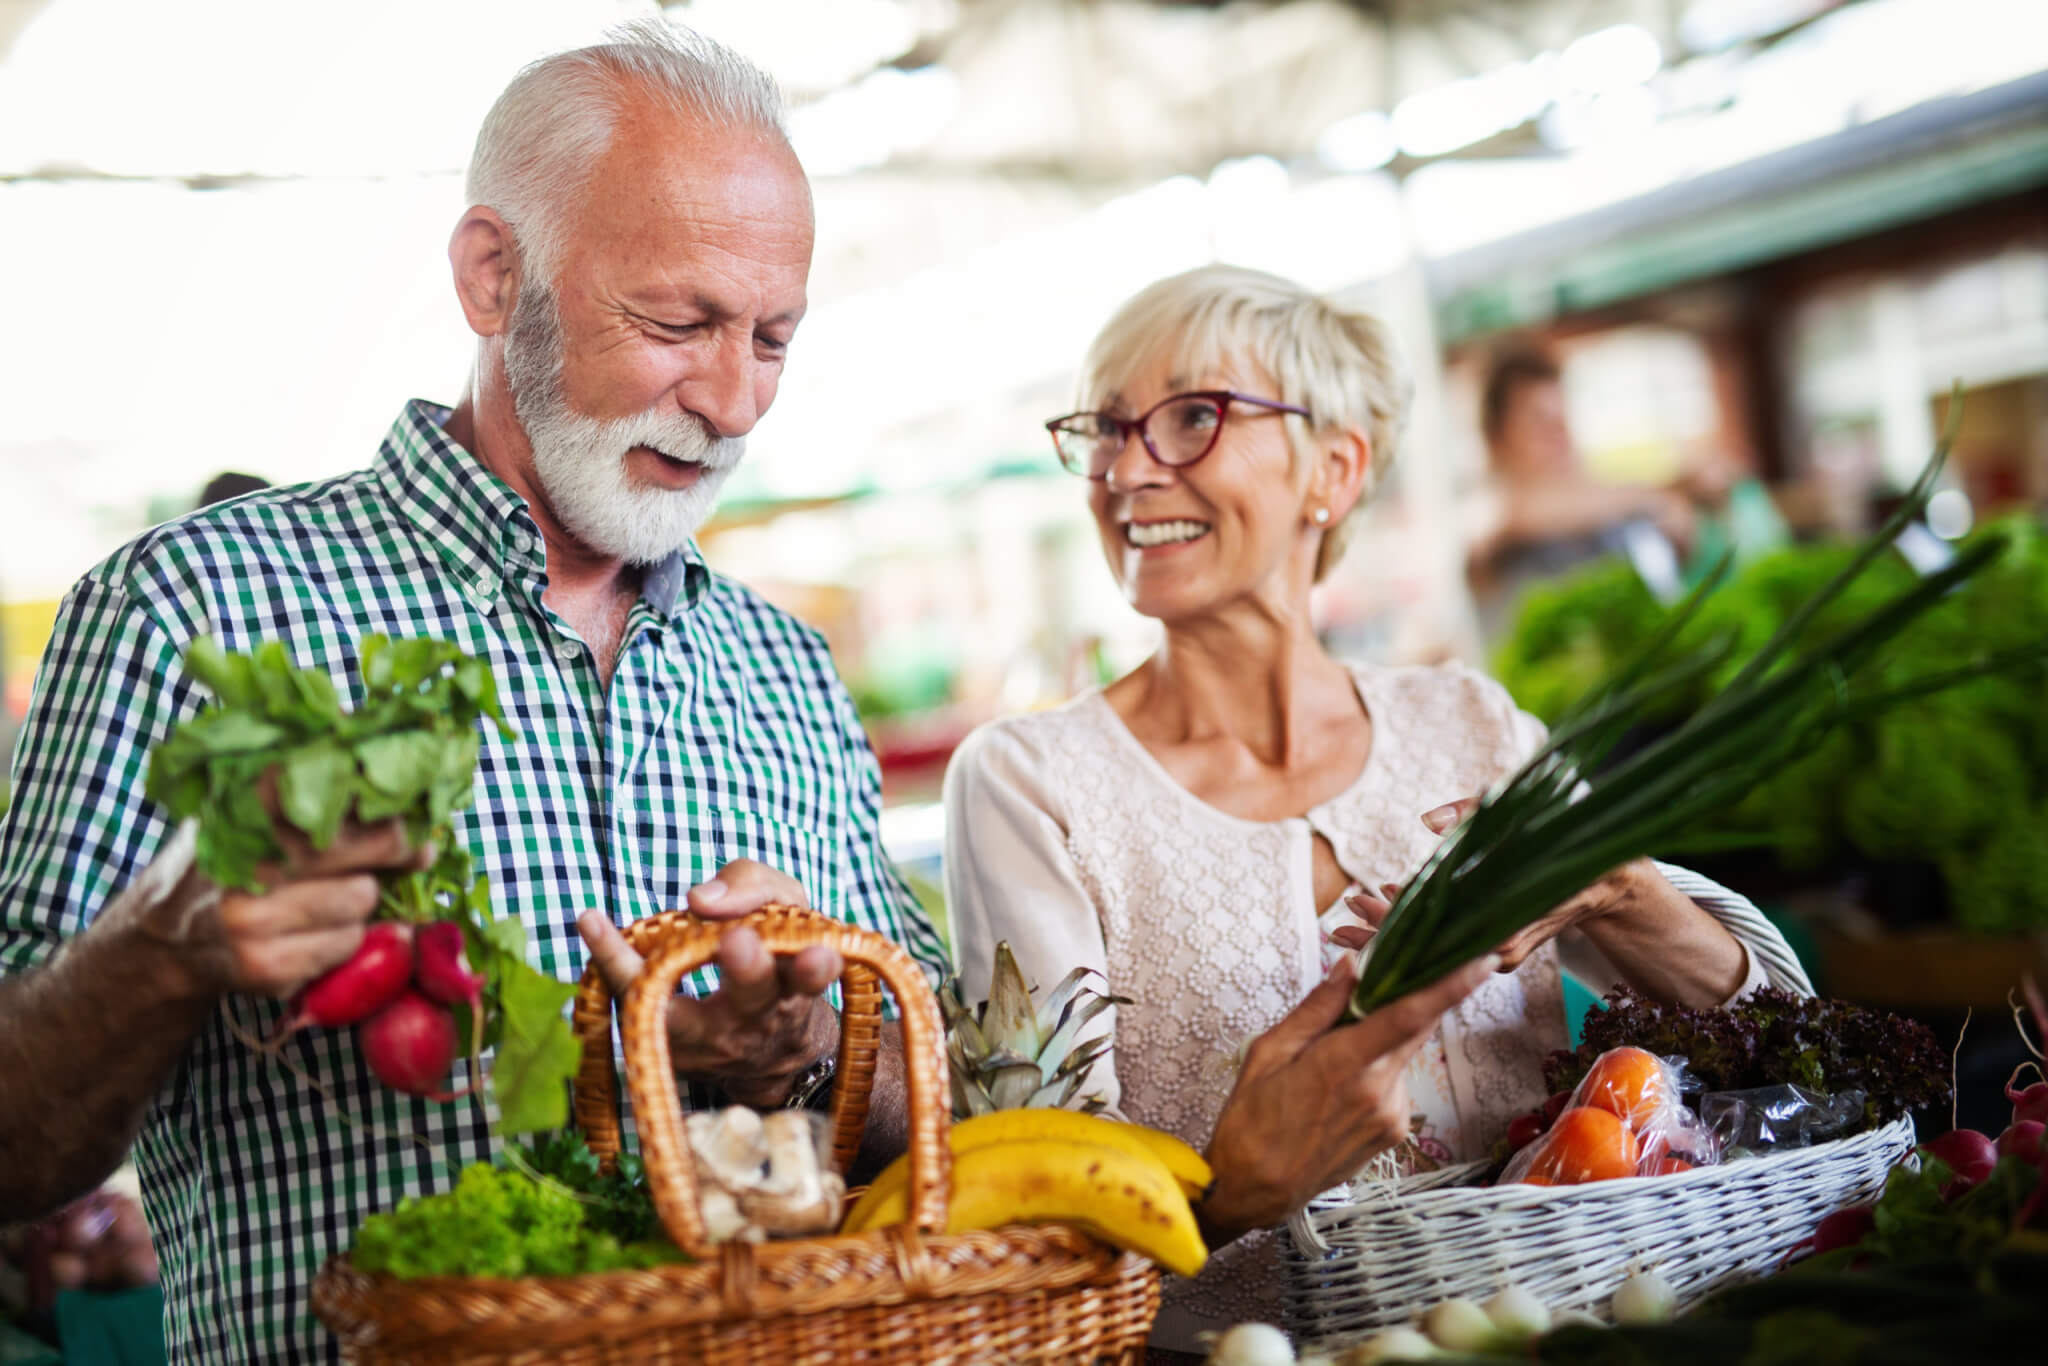 You are what you eat: Healthy diet tops drugs when it comes to anti-aging benefits